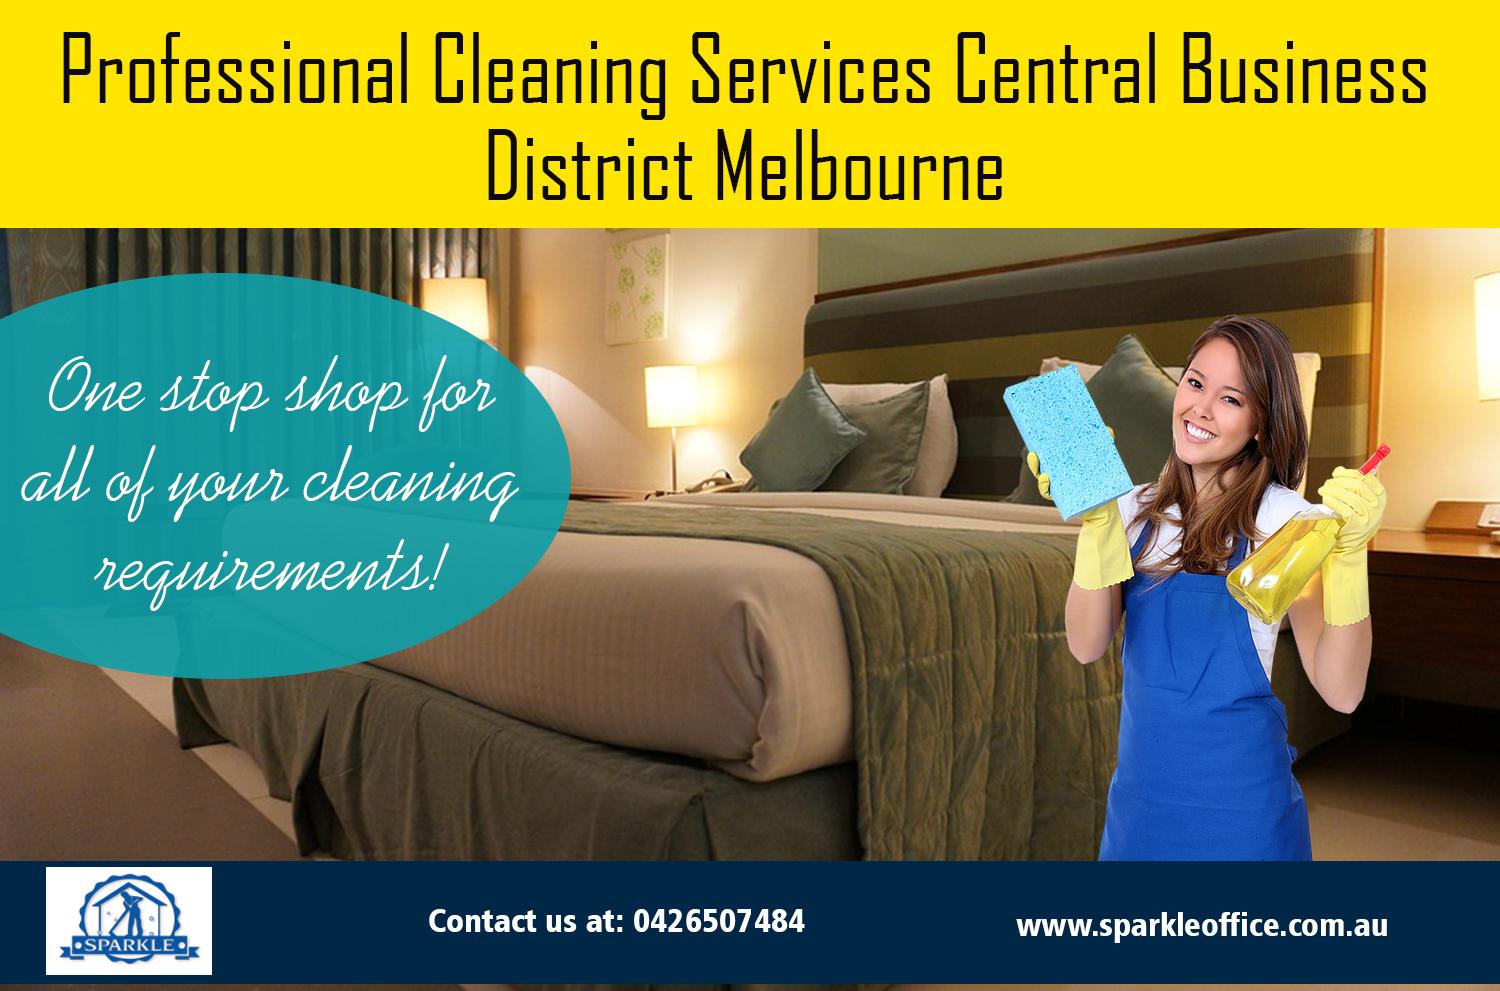 Professional Cleaning Services Central business district Melbourne